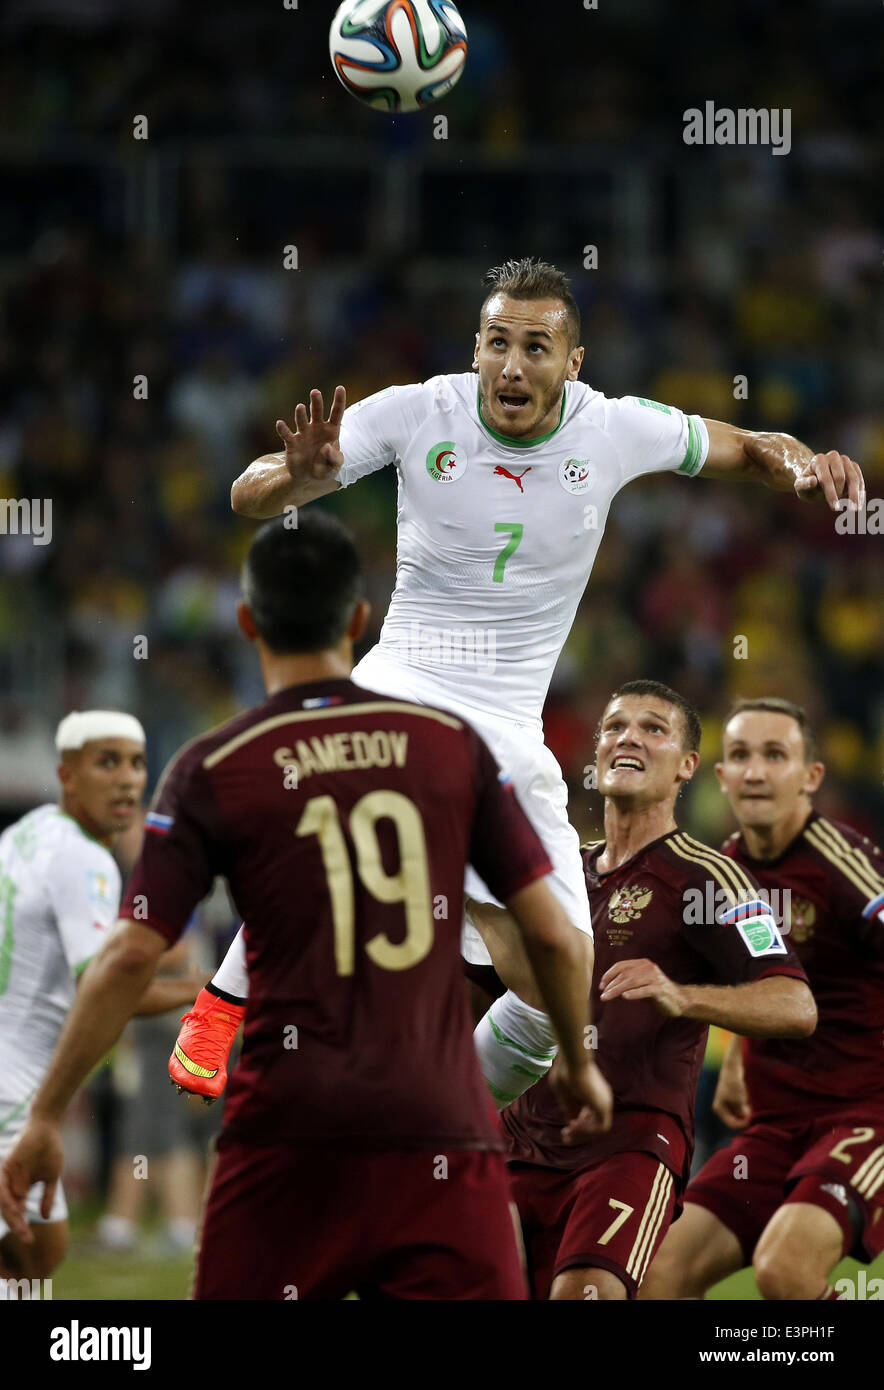 (140626) -- CURITIBA, June 26, 2014 (Xinhua) -- Algeria's Hassan Yebda (up) competes for a header during a Group H match between Algeria and Russia of 2014 FIFA World Cup at the Arena da Baixada Stadium in Curitiba, Brazil, June 26, 2014. The match ended in a 1-1 draw.Algeria enters Round of 16 after the Thursday match which ended in a 1-1 draw.(Xinhua/Liao Yujie) Stock Photo